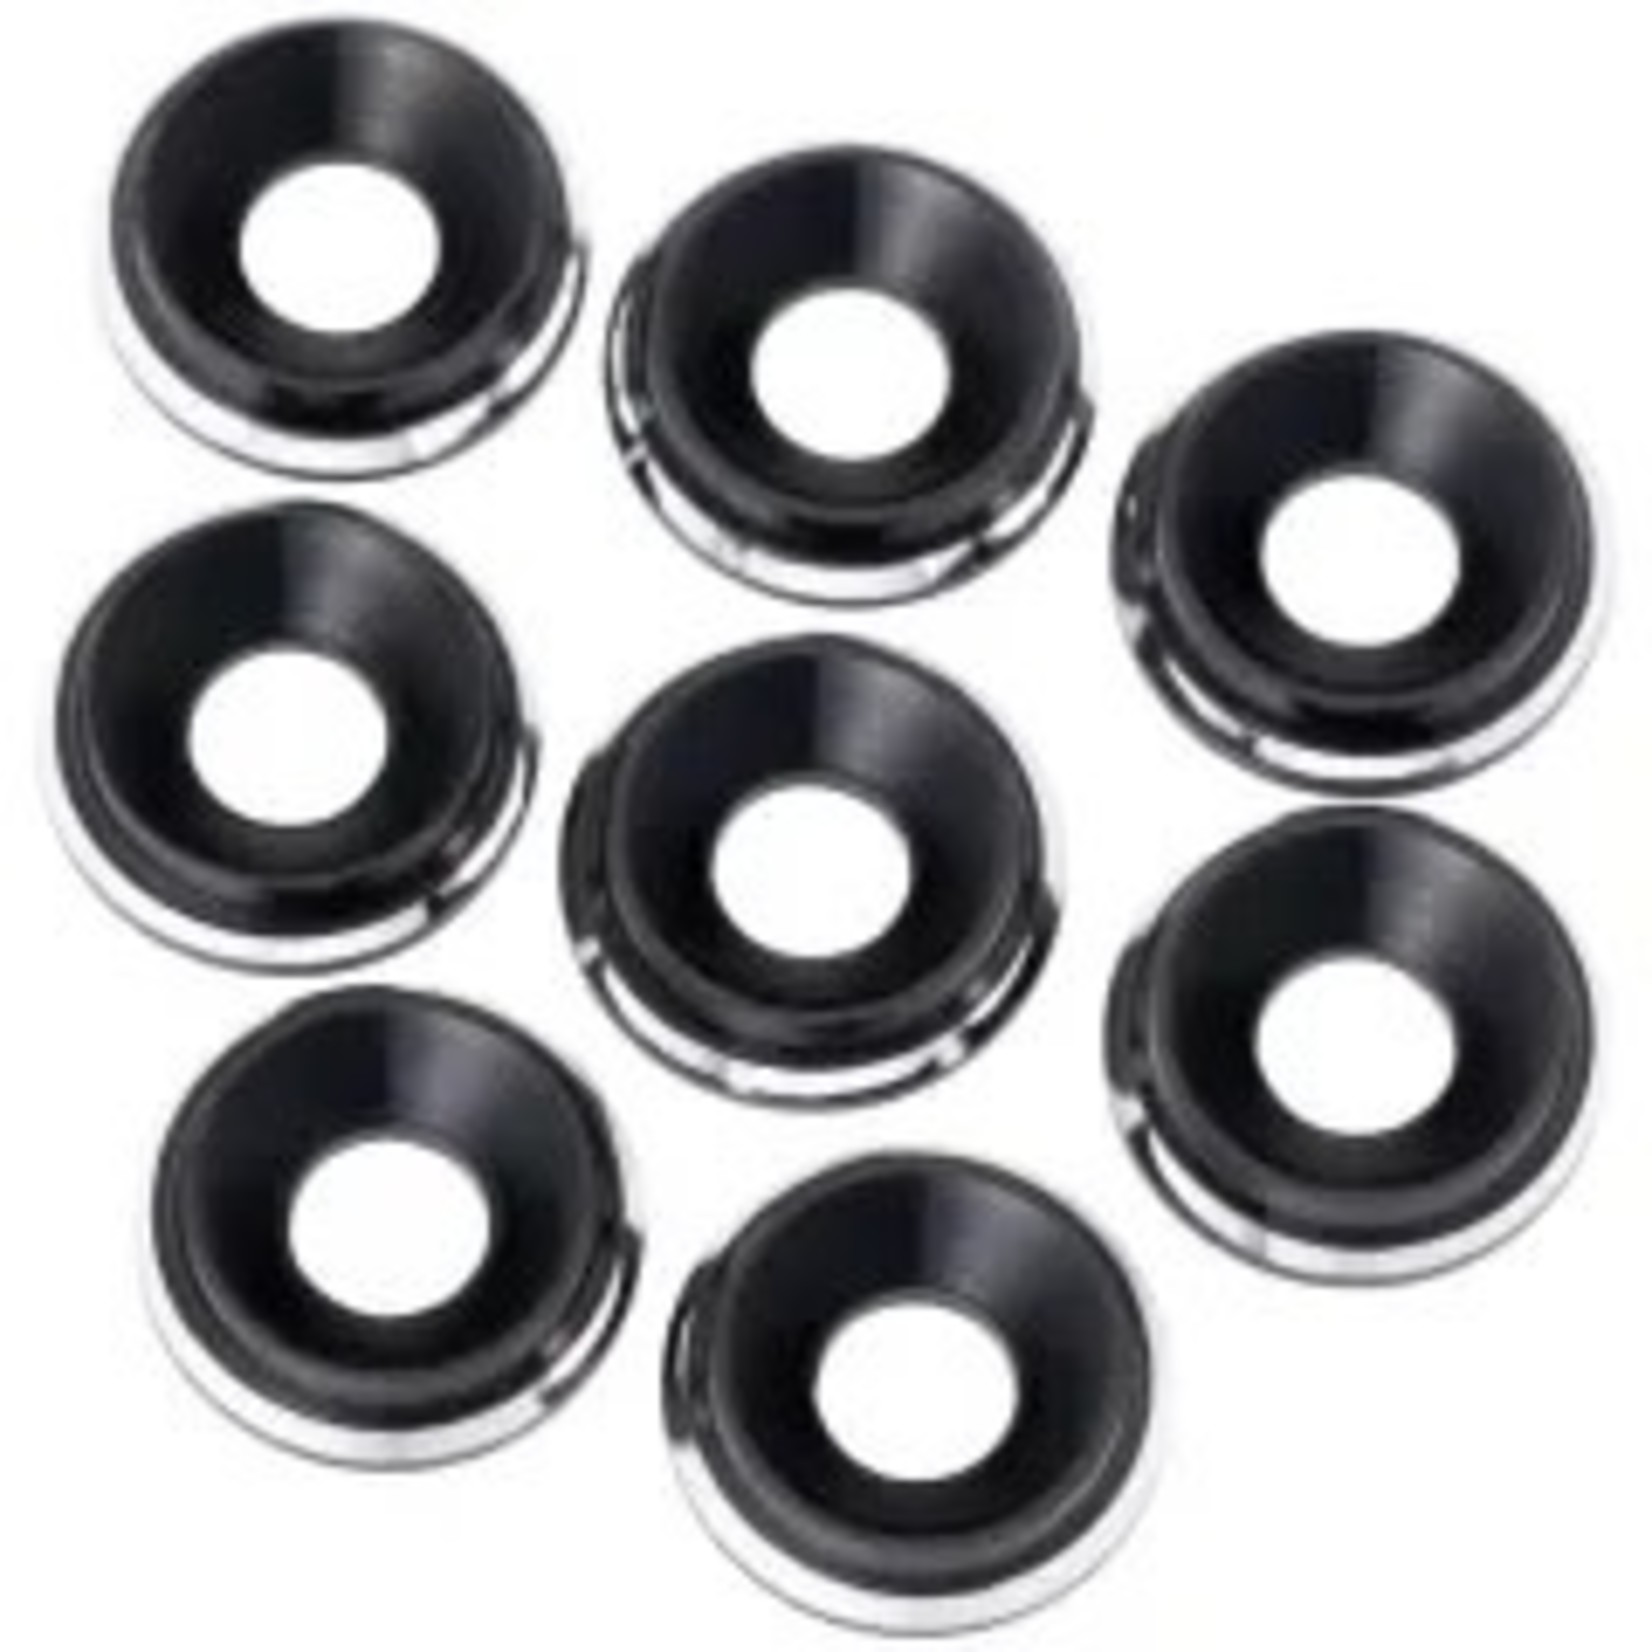 1UP 1UP820019 1Up Racing 7075 LowPro Countersunk Washers - M3 - 8pcs - Black Shine